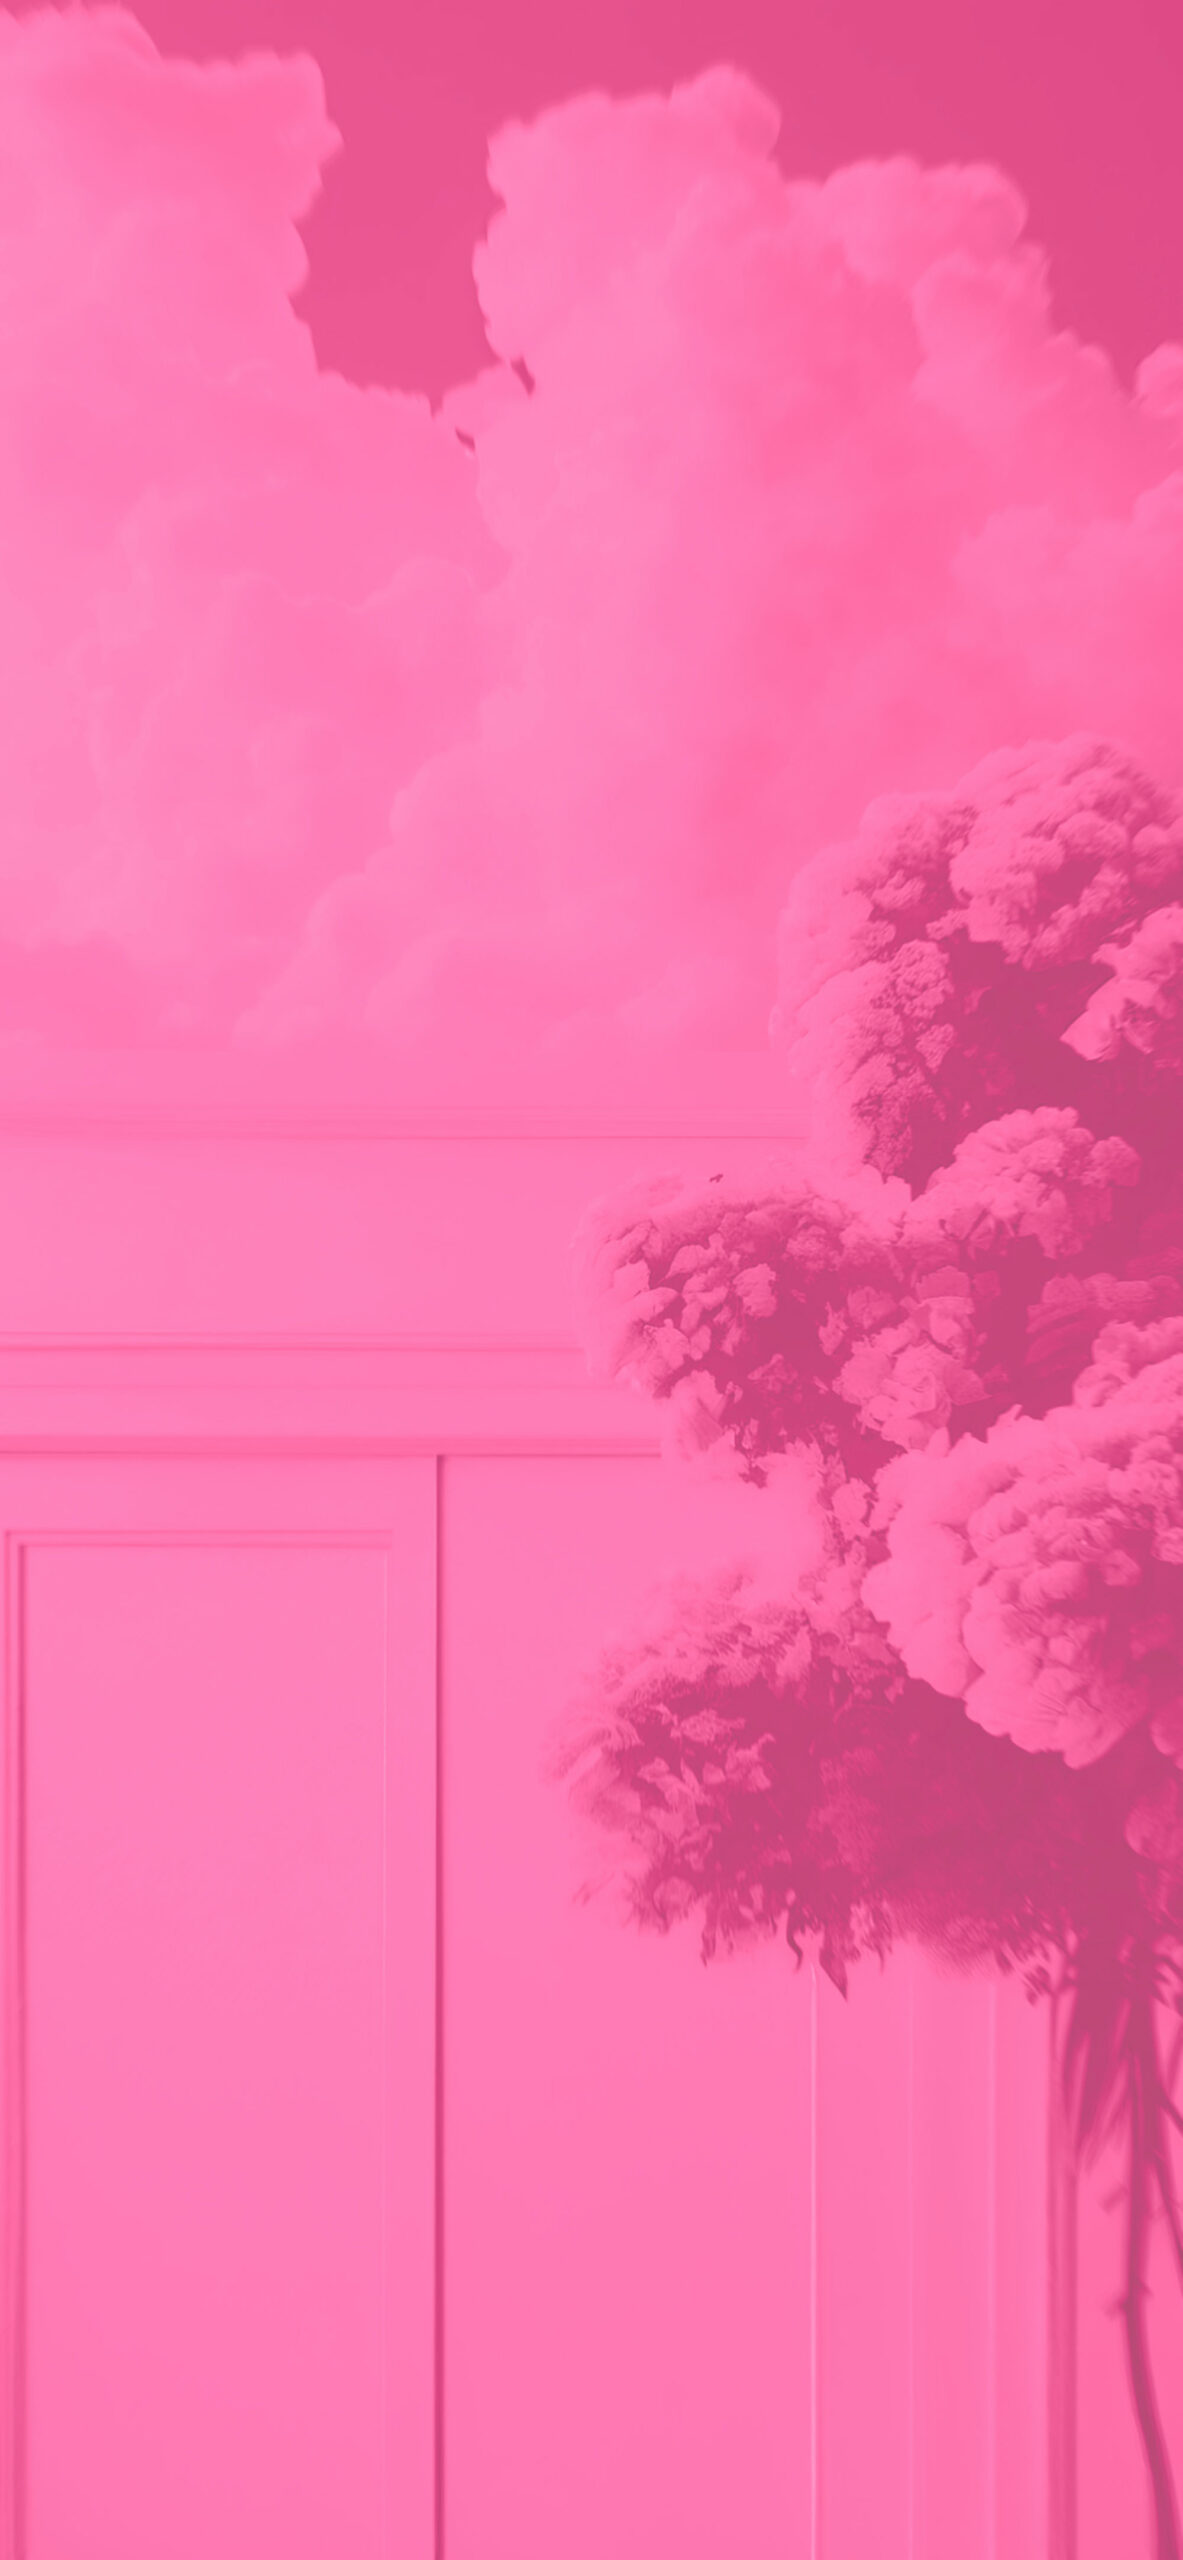 clouds wall and tree aesthetic pink background